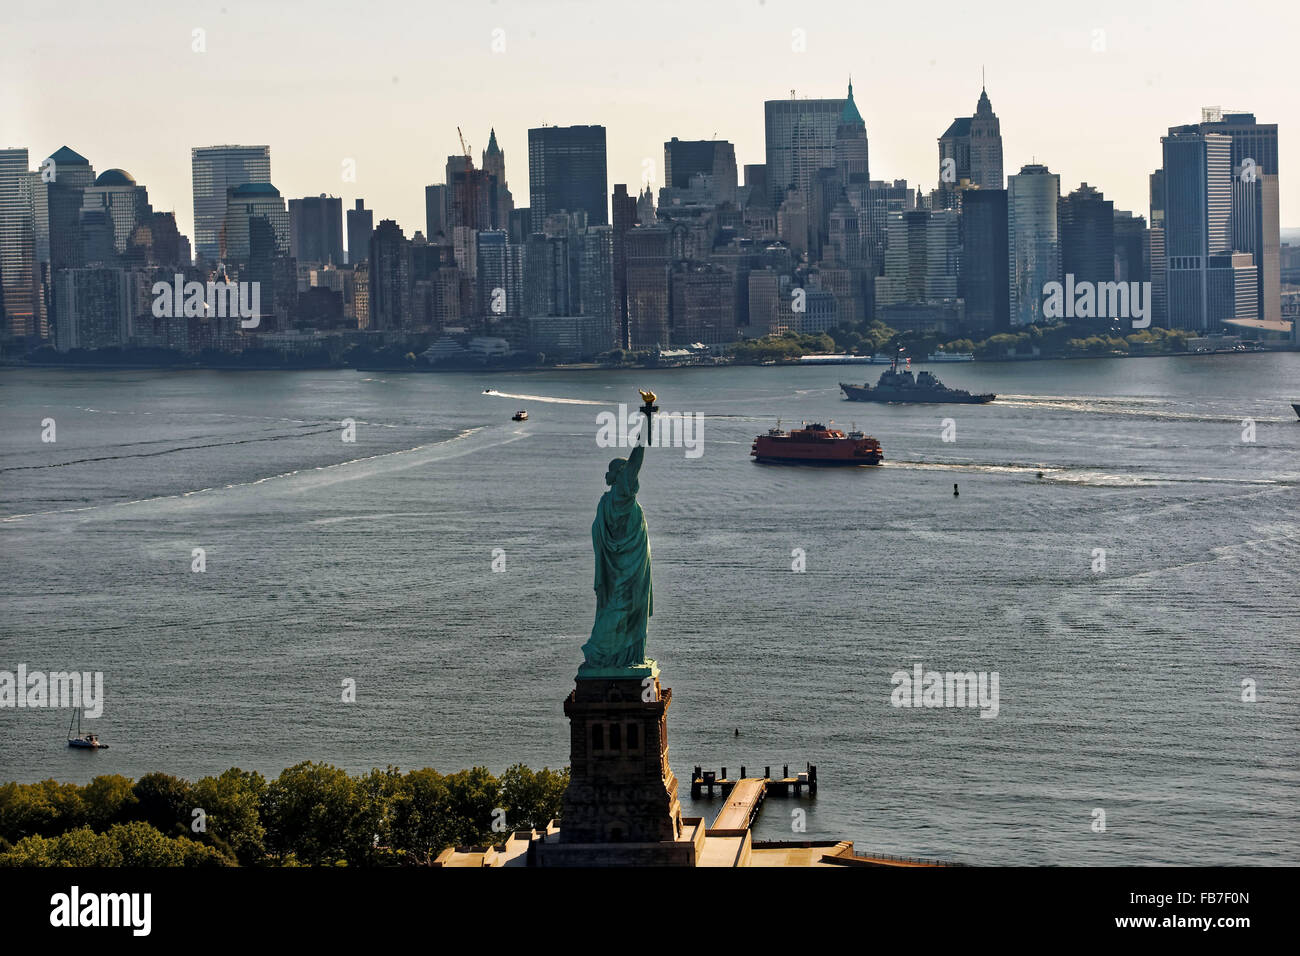 The Statue of Liberty sits at the entrance to New York Harbor. Stock Photo